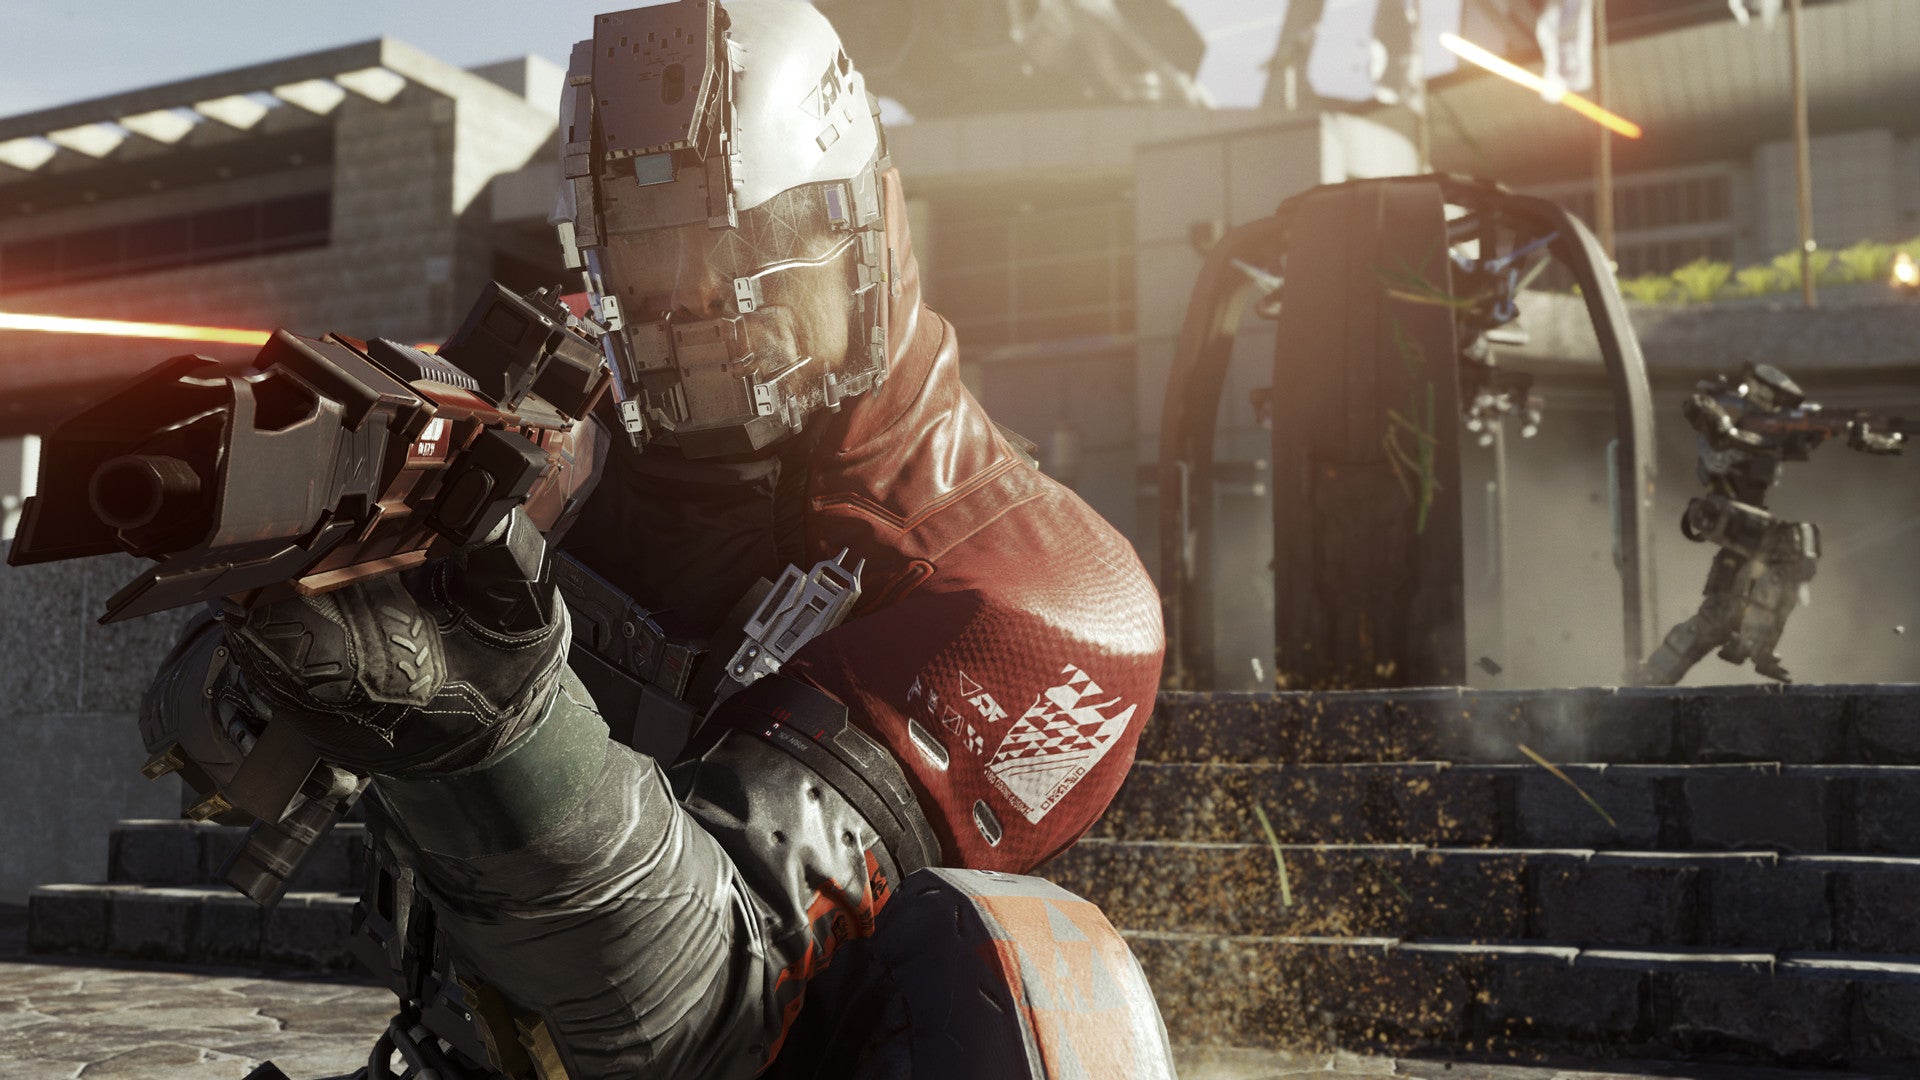 Image for Court dismisses "factually baseless" Call of Duty lawsuit against Activision Blizzard